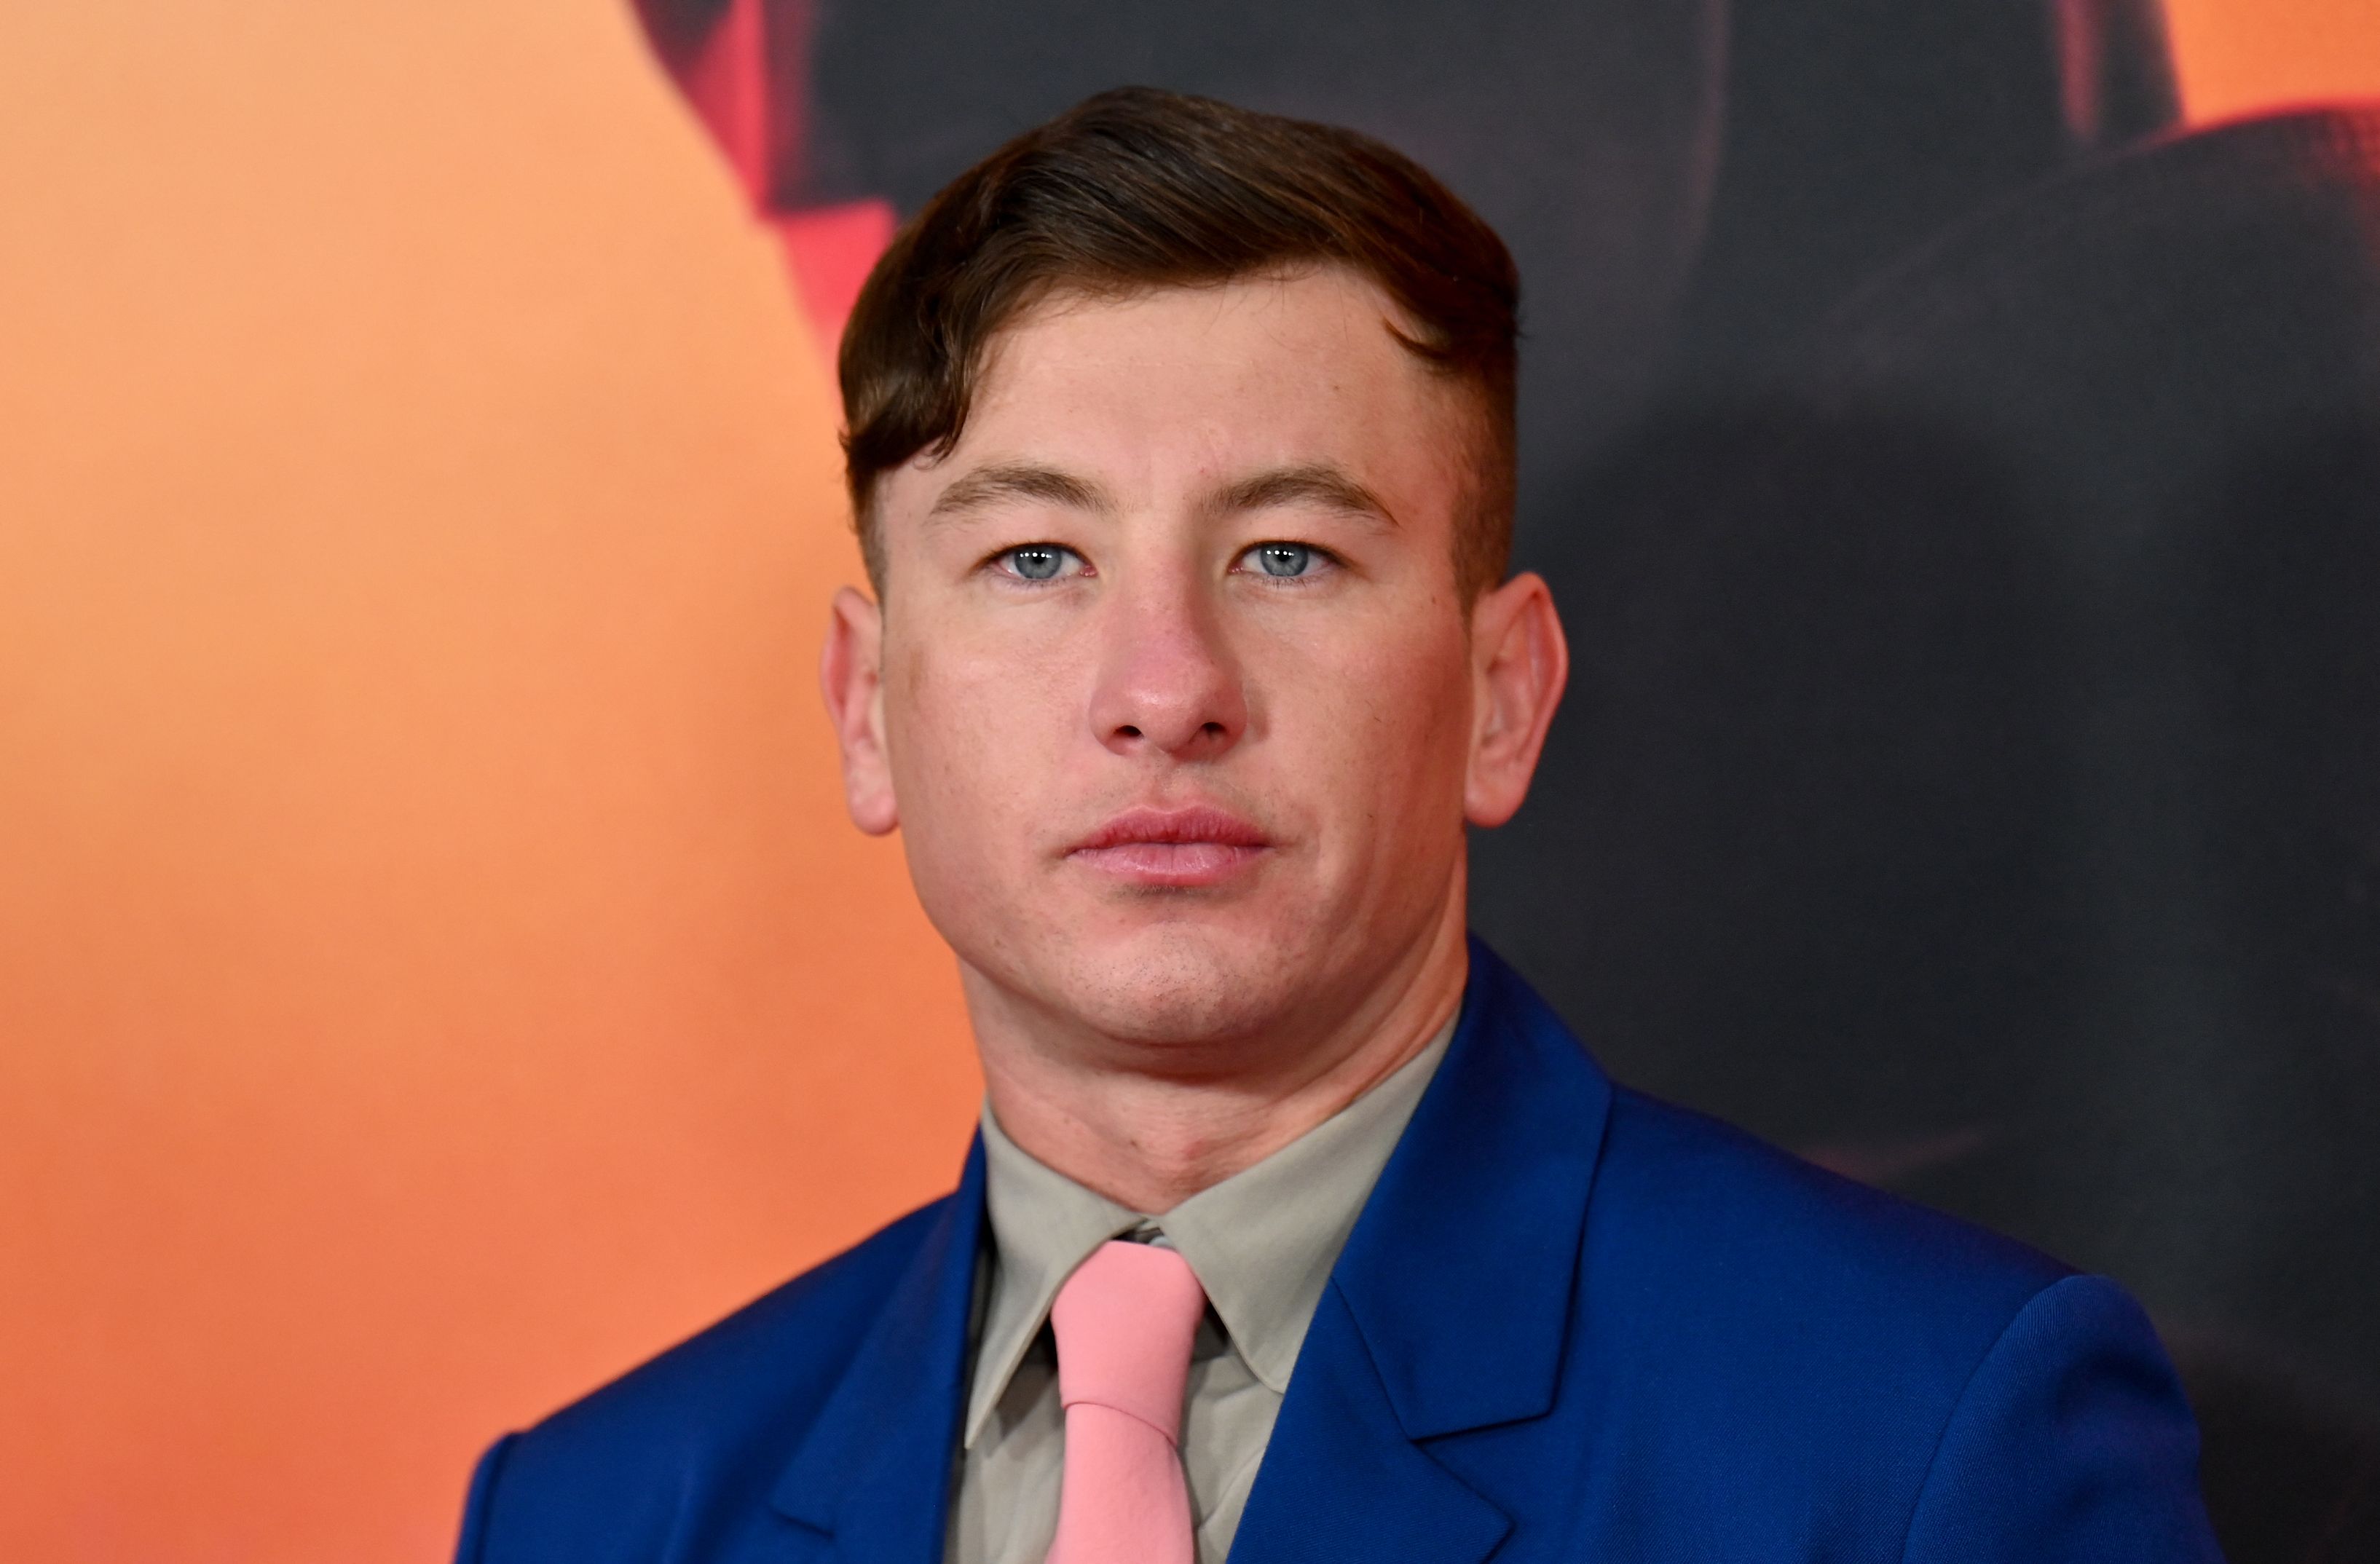 Barry Keoghan attends the world premiere for "The Batman" on March 1, 2022 in New York | Source: Getty Images